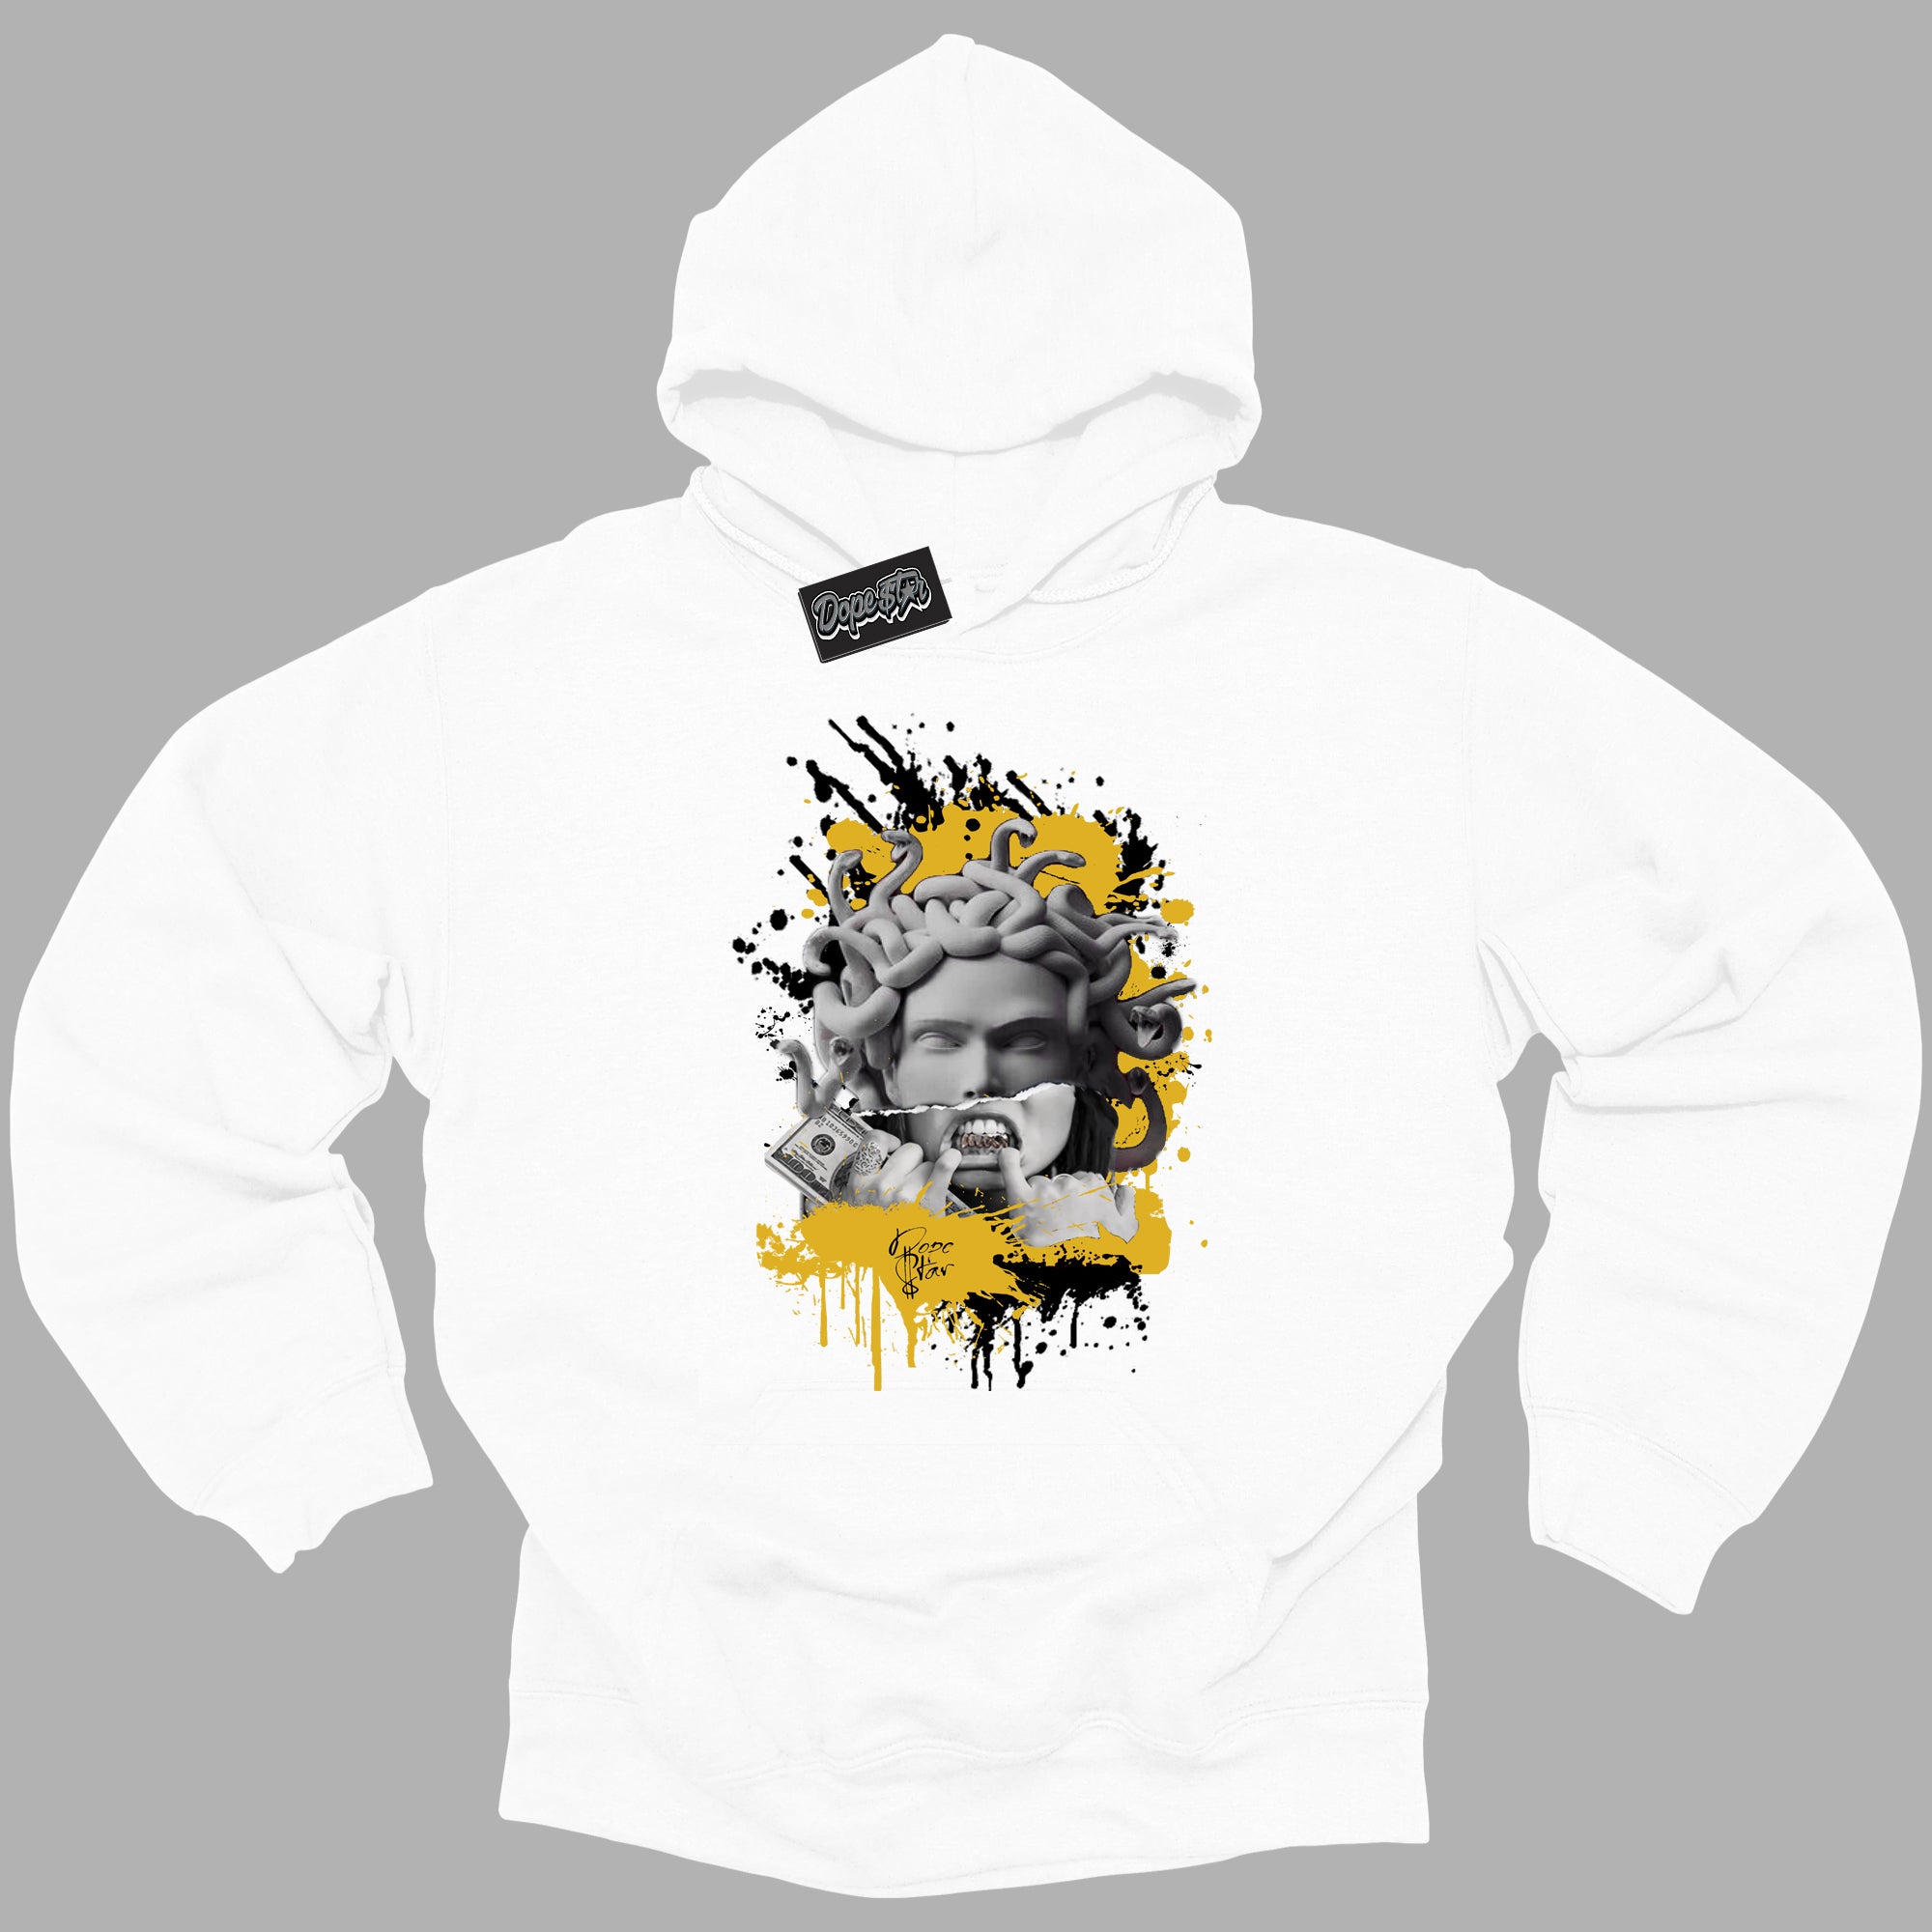 Cool White Hoodie with “ Medusa ”  design that Perfectly Matches Yellow Ochre 6s Sneakers.